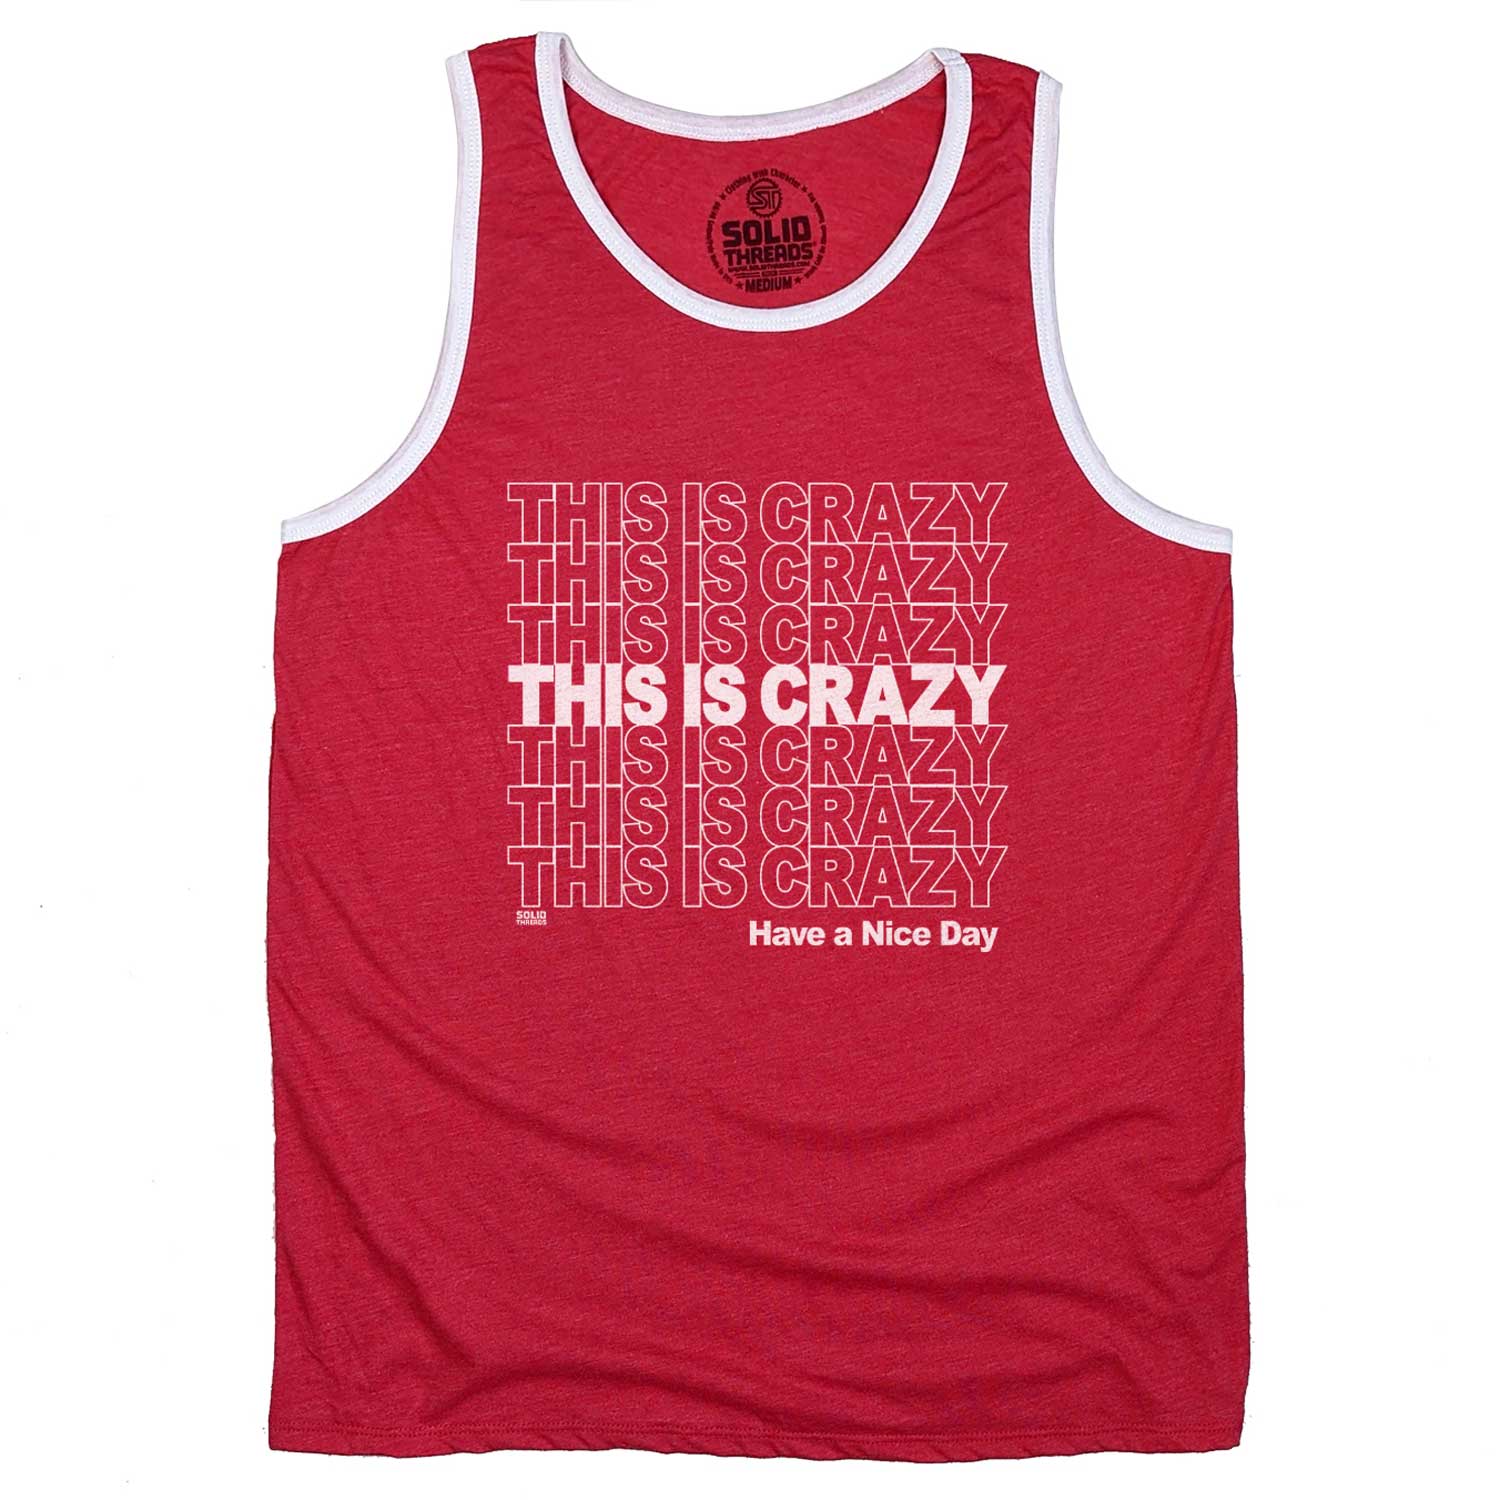 Men's This is Crazy Funny Graphic Tank Top | National Lampoon's Sleeveless Shirt | Solid Threads